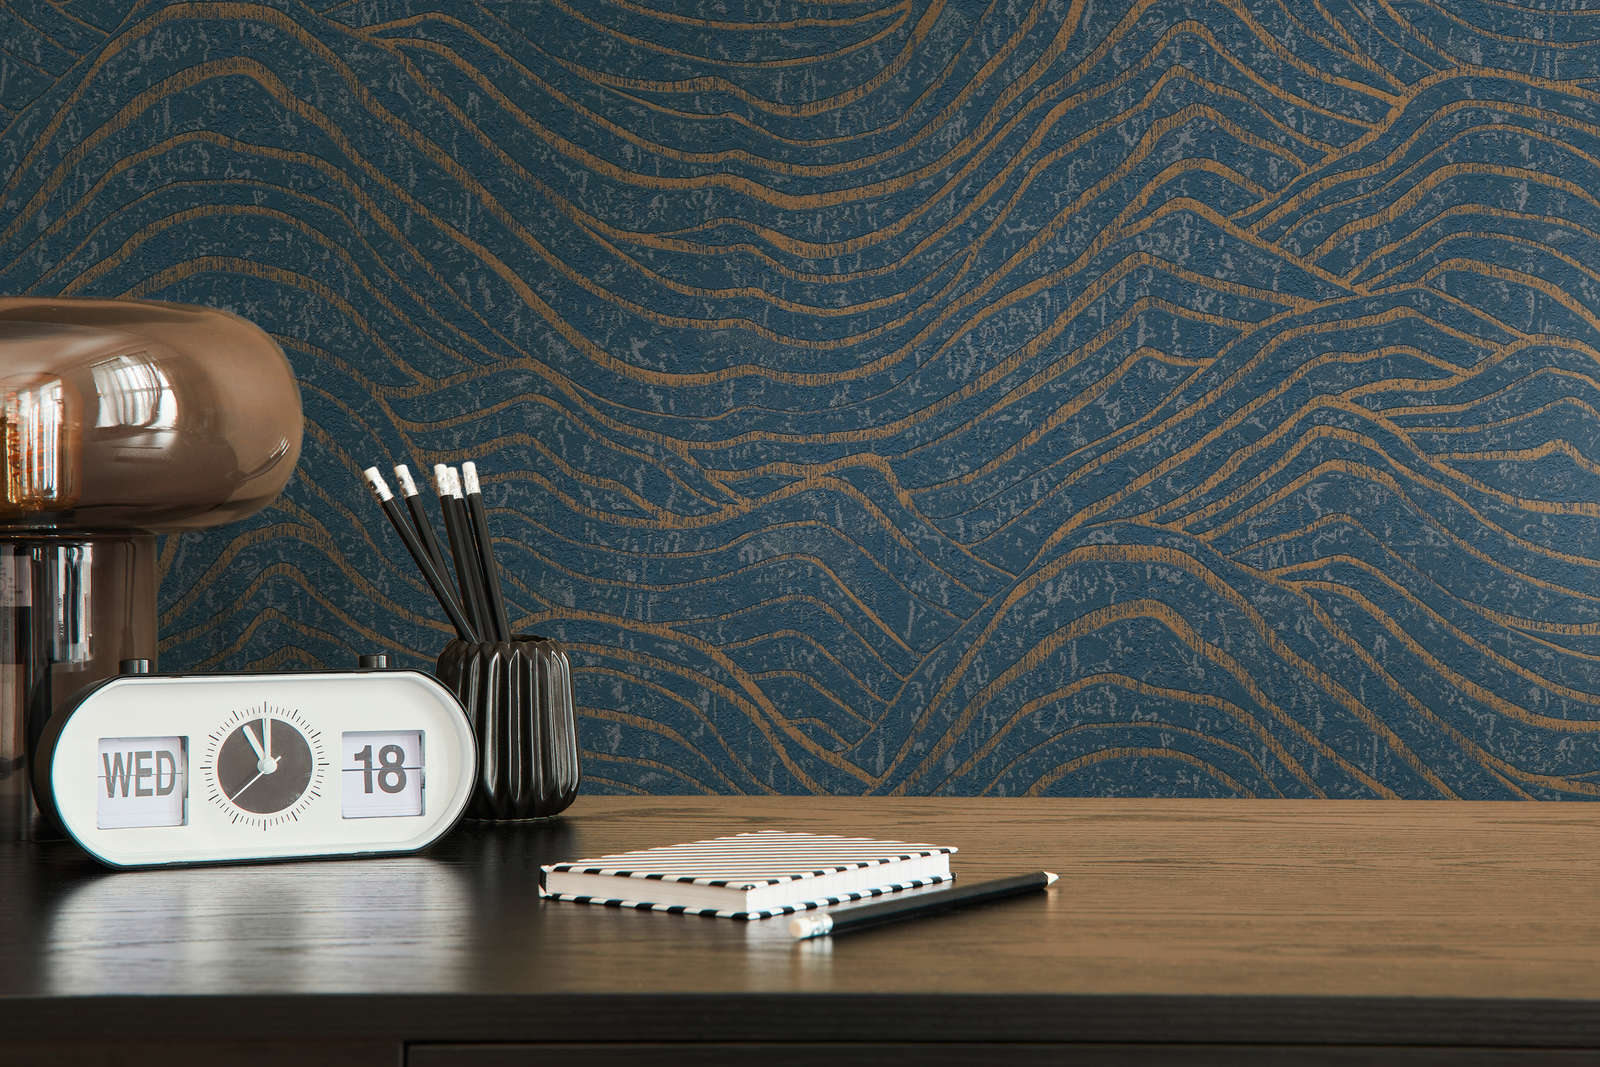             Wallpaper with abstract hill pattern - dark blue, gold
        